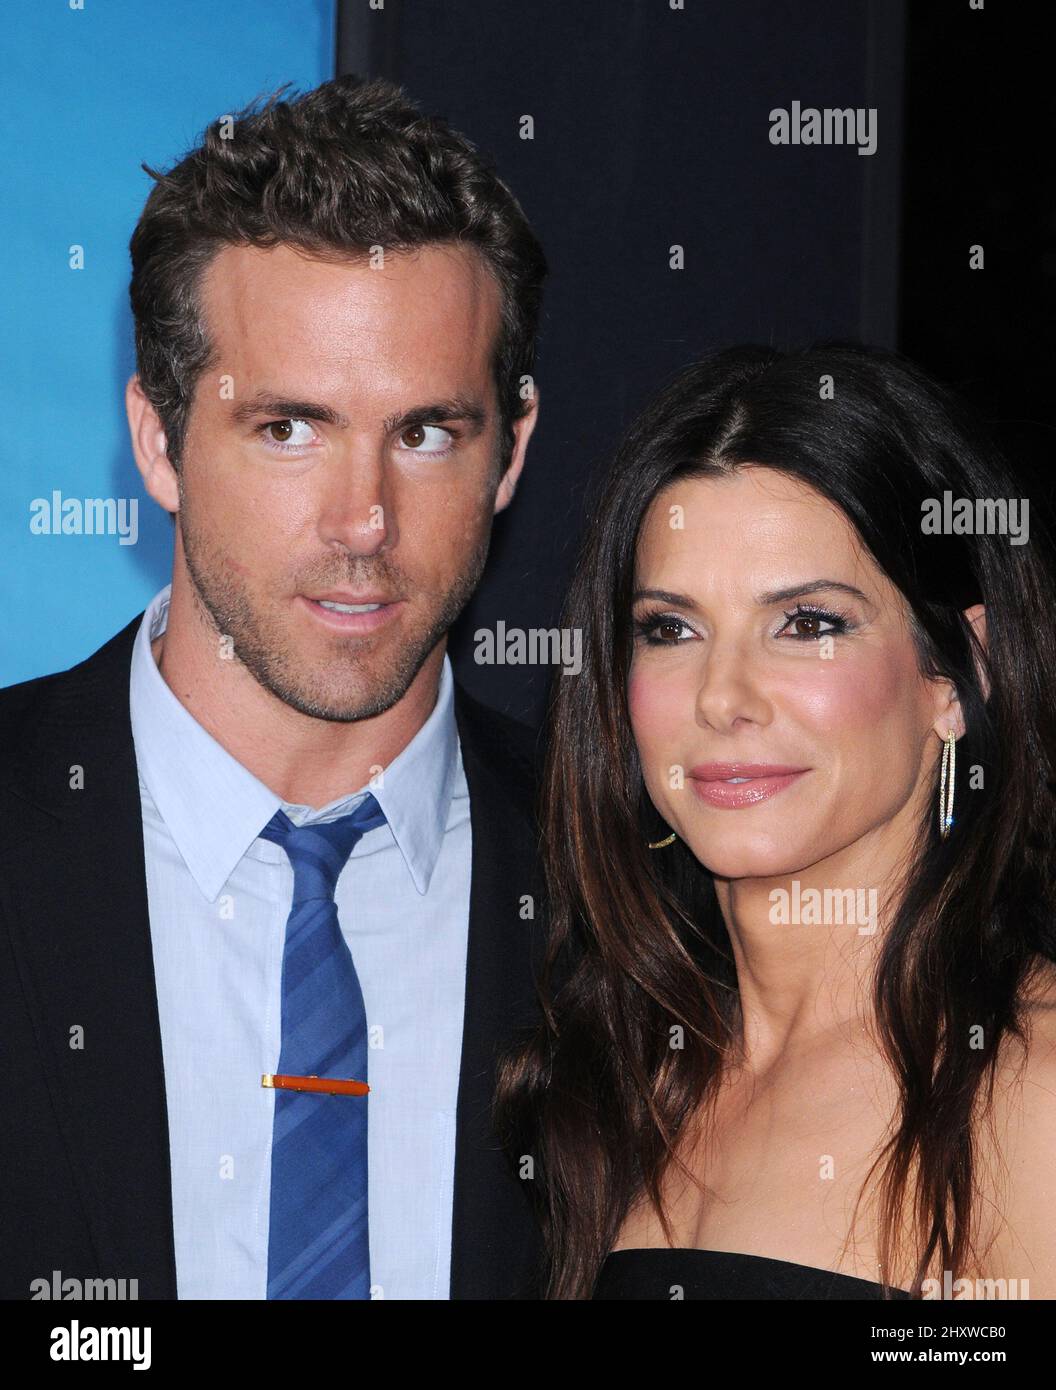 https://c8.alamy.com/comp/2HXWCB0/ryan-reynolds-and-sandra-bullock-during-the-change-up-world-premiere-held-at-the-village-theatre-california-2HXWCB0.jpg